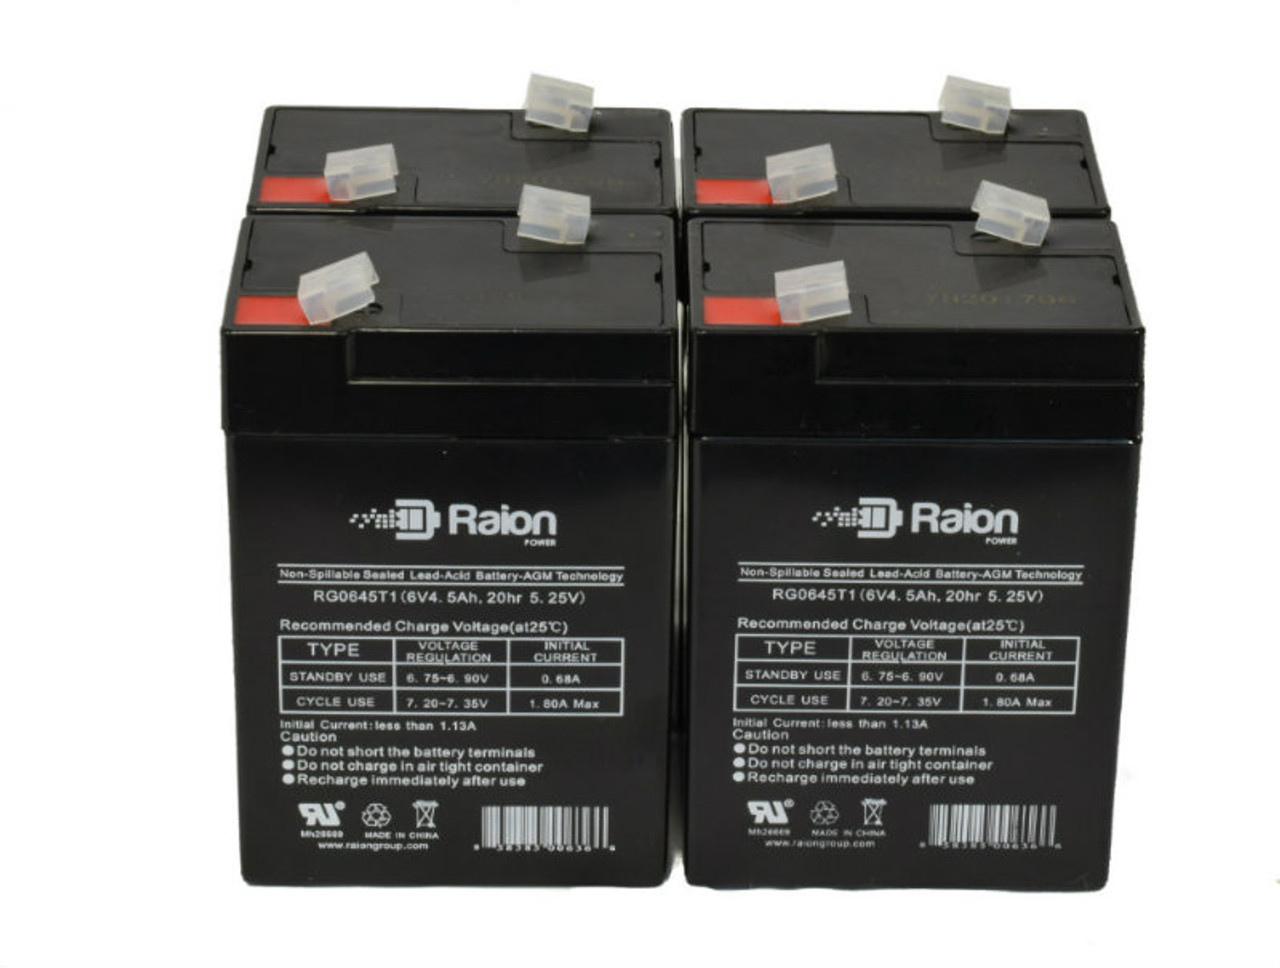 Raion Power 6 Volt 4.5Ah RG0645T1 Replacement Battery for TLV650 - 4 Pack